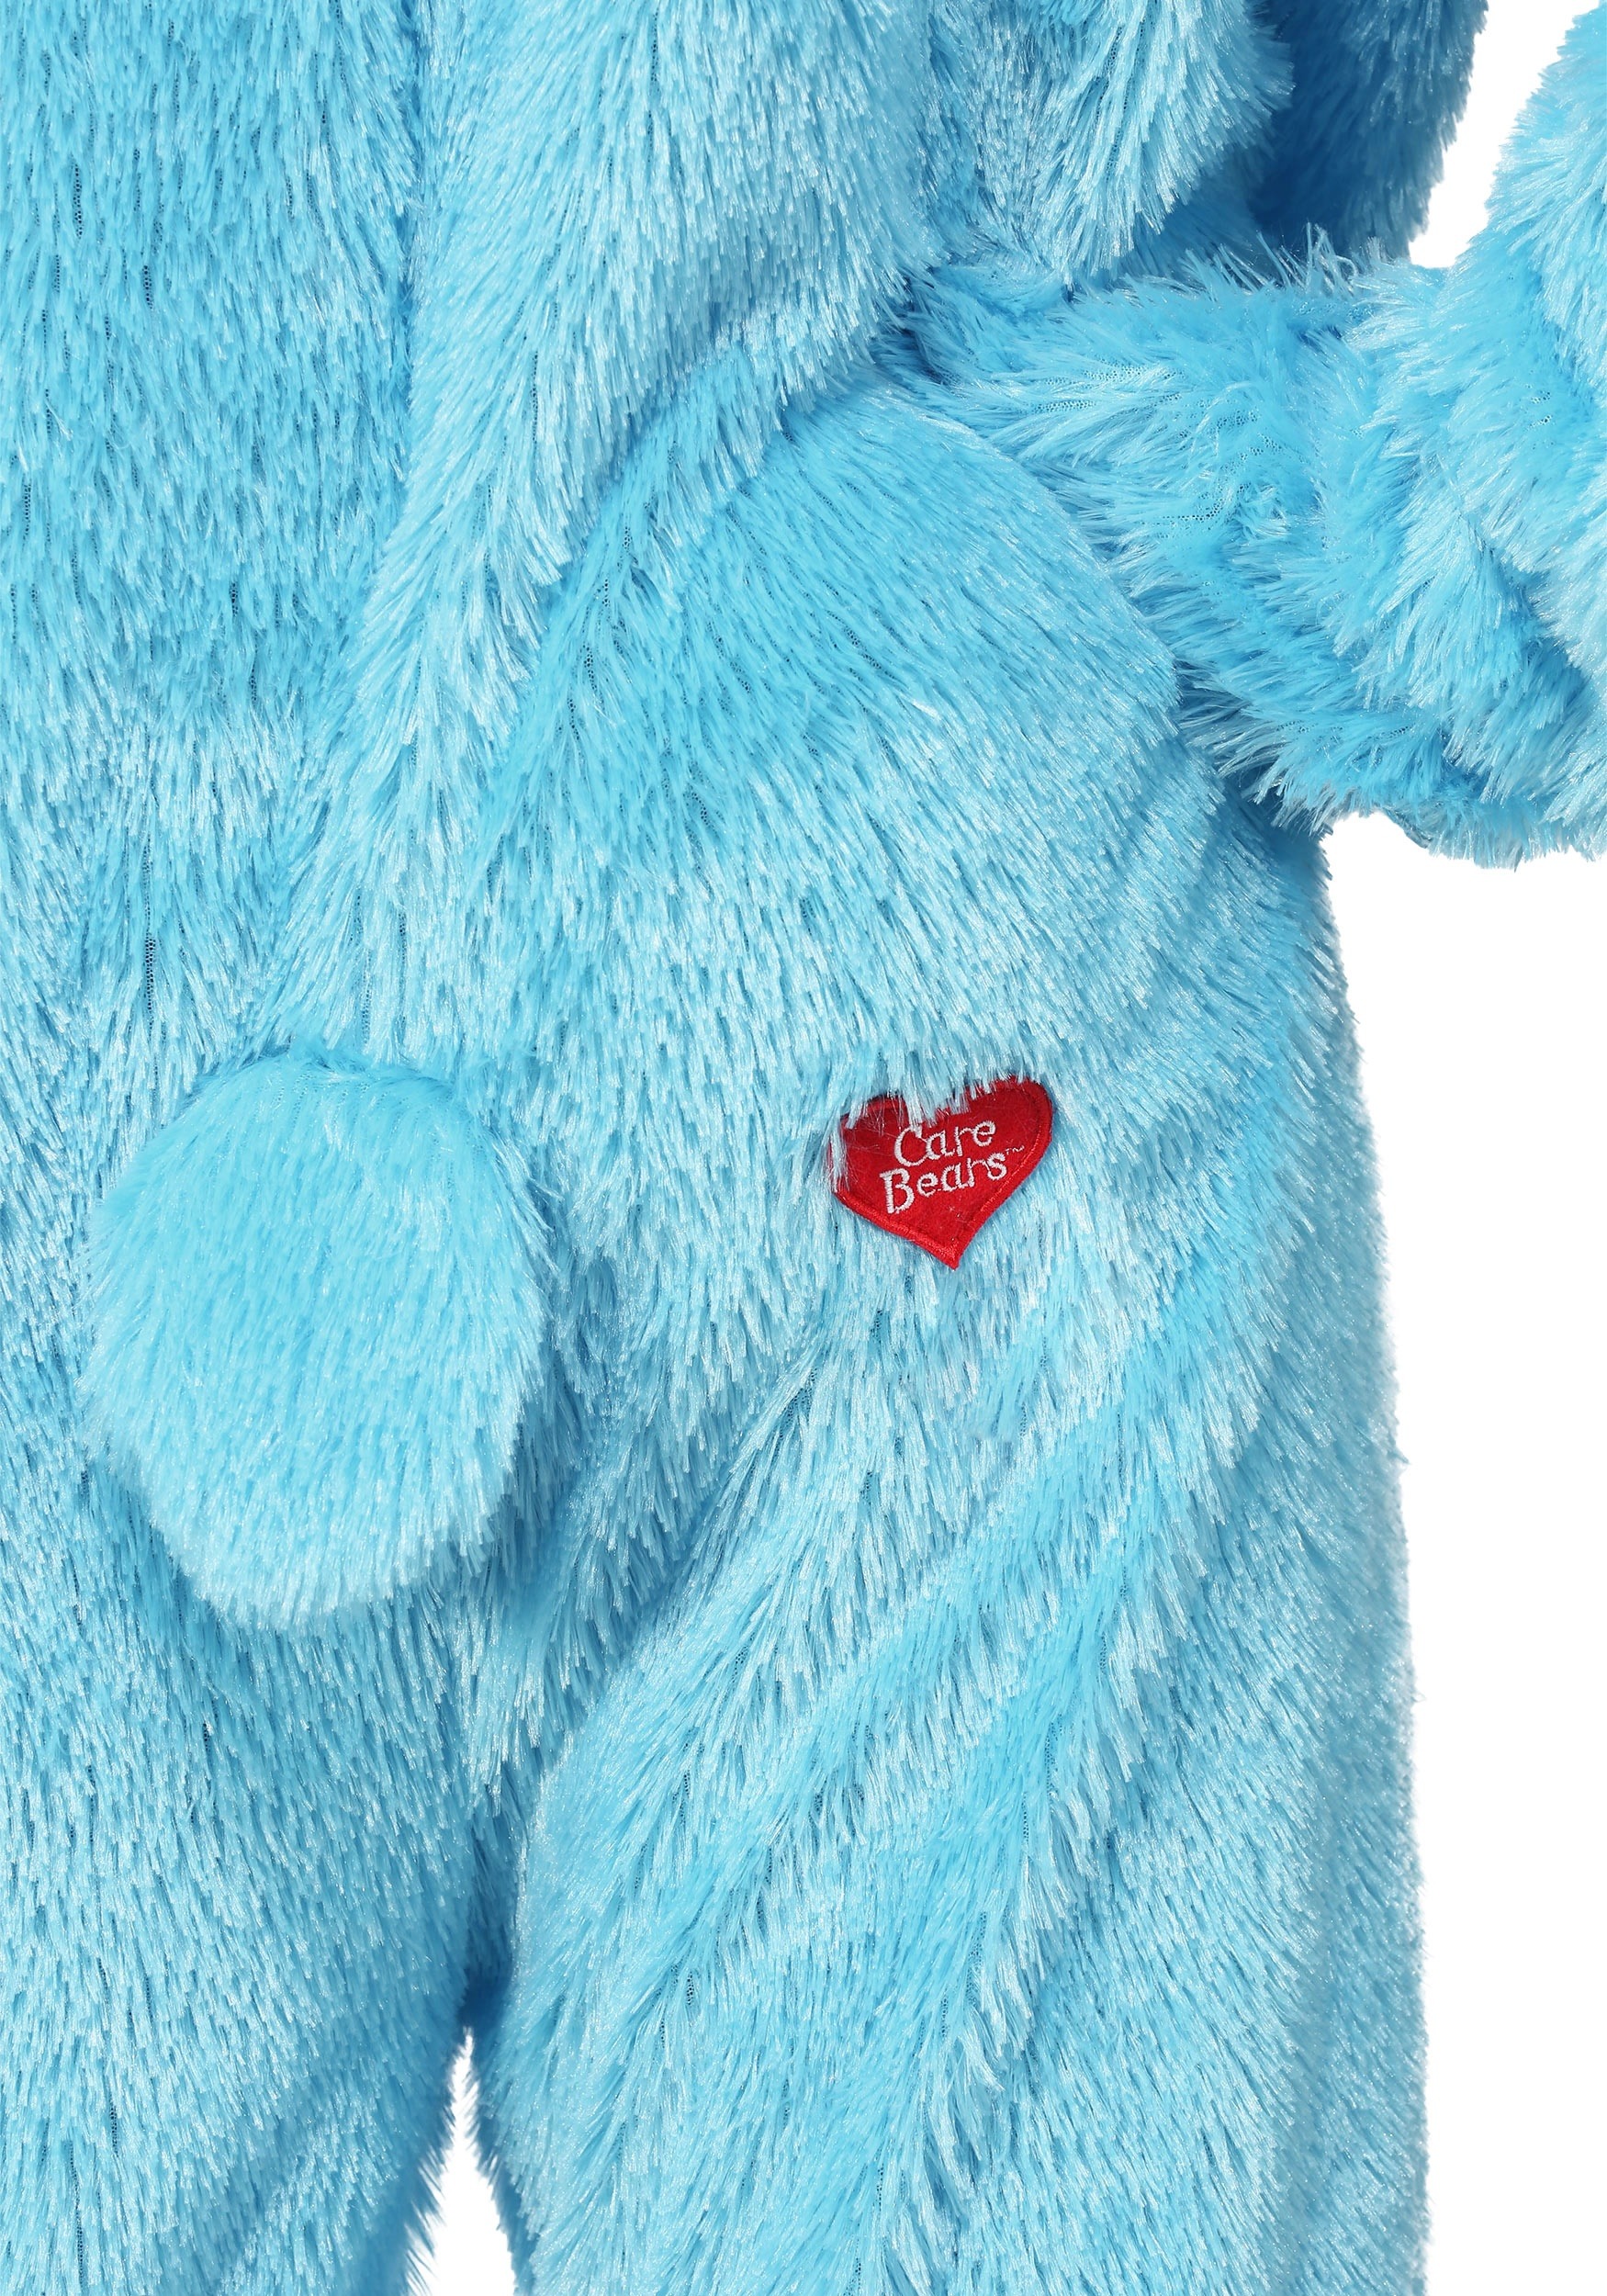 Care Bears Adult Classic Bed Time Bear Costume